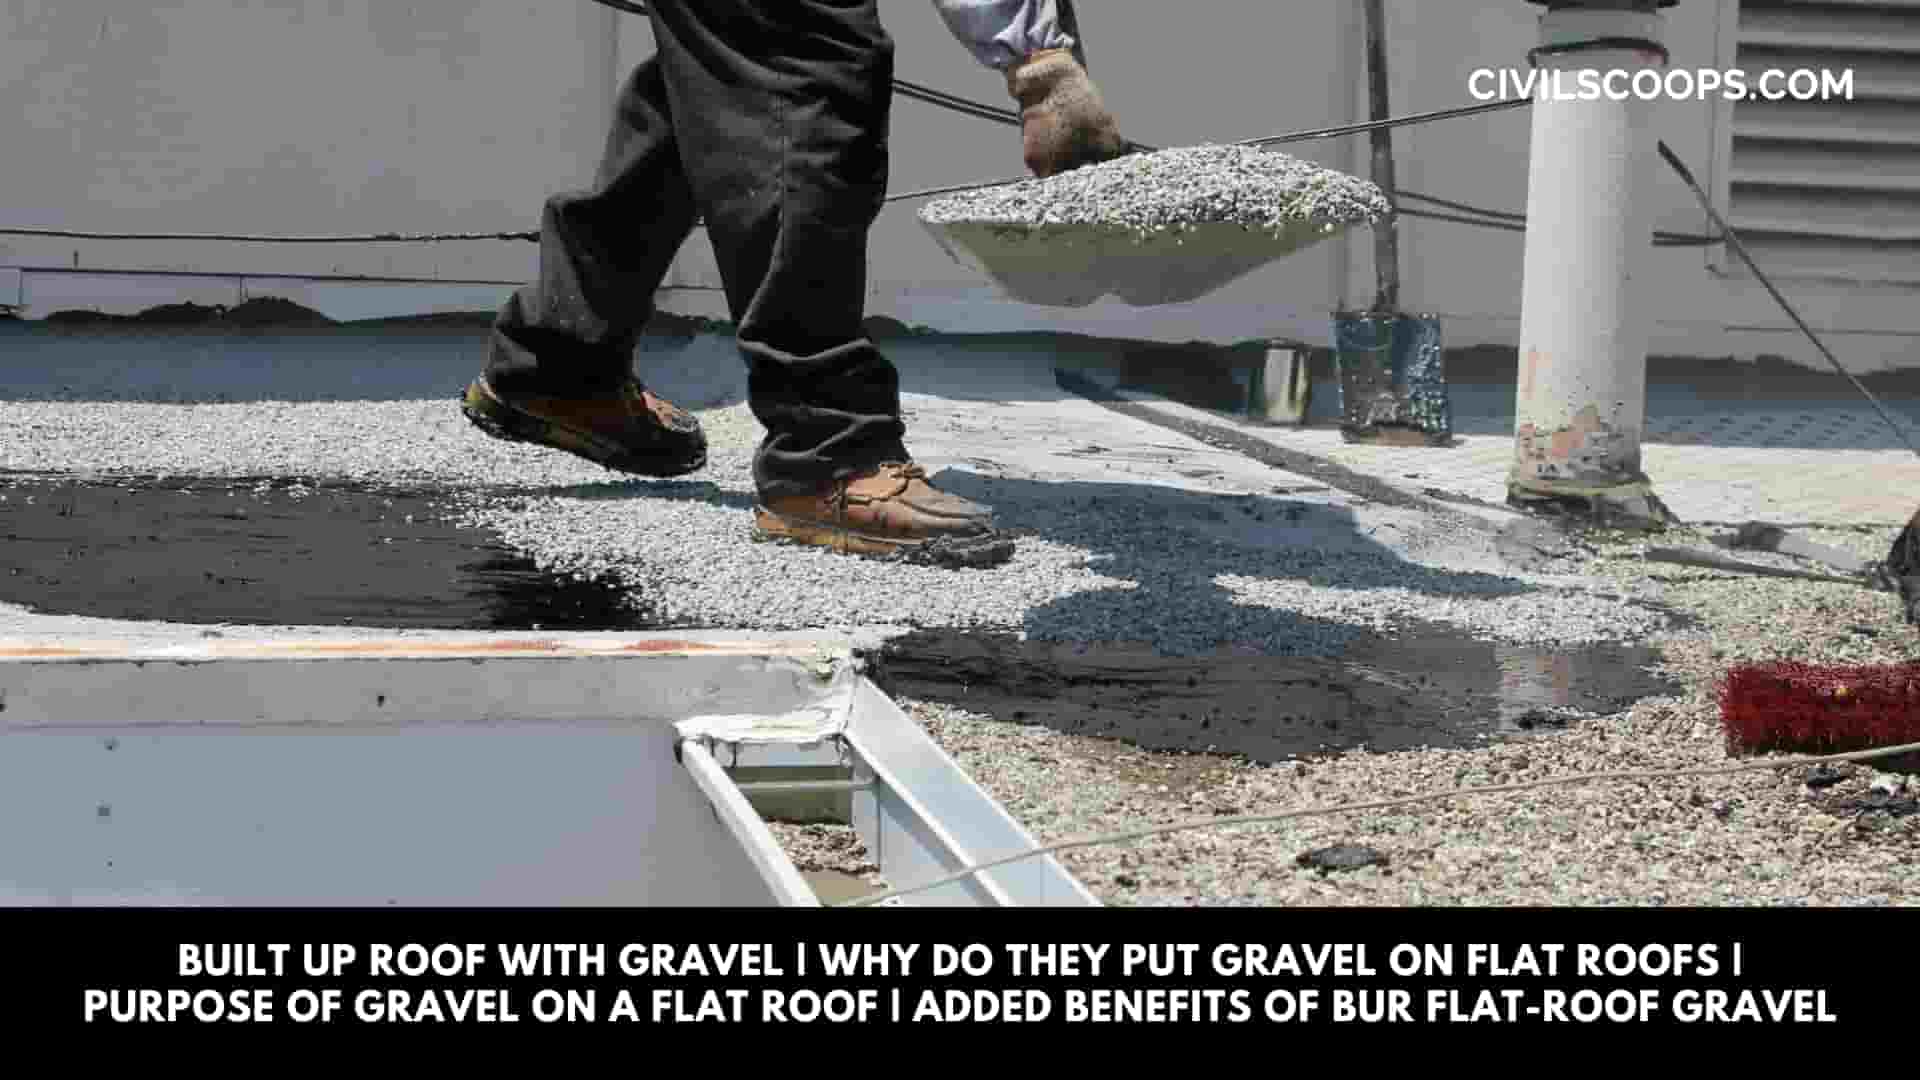 Built Up Roof with Gravel Why Do They Put Gravel on Flat Roofs Purpose of Gravel on a Flat Roof Added Benefits of Bur Flat-Roof Gravel 